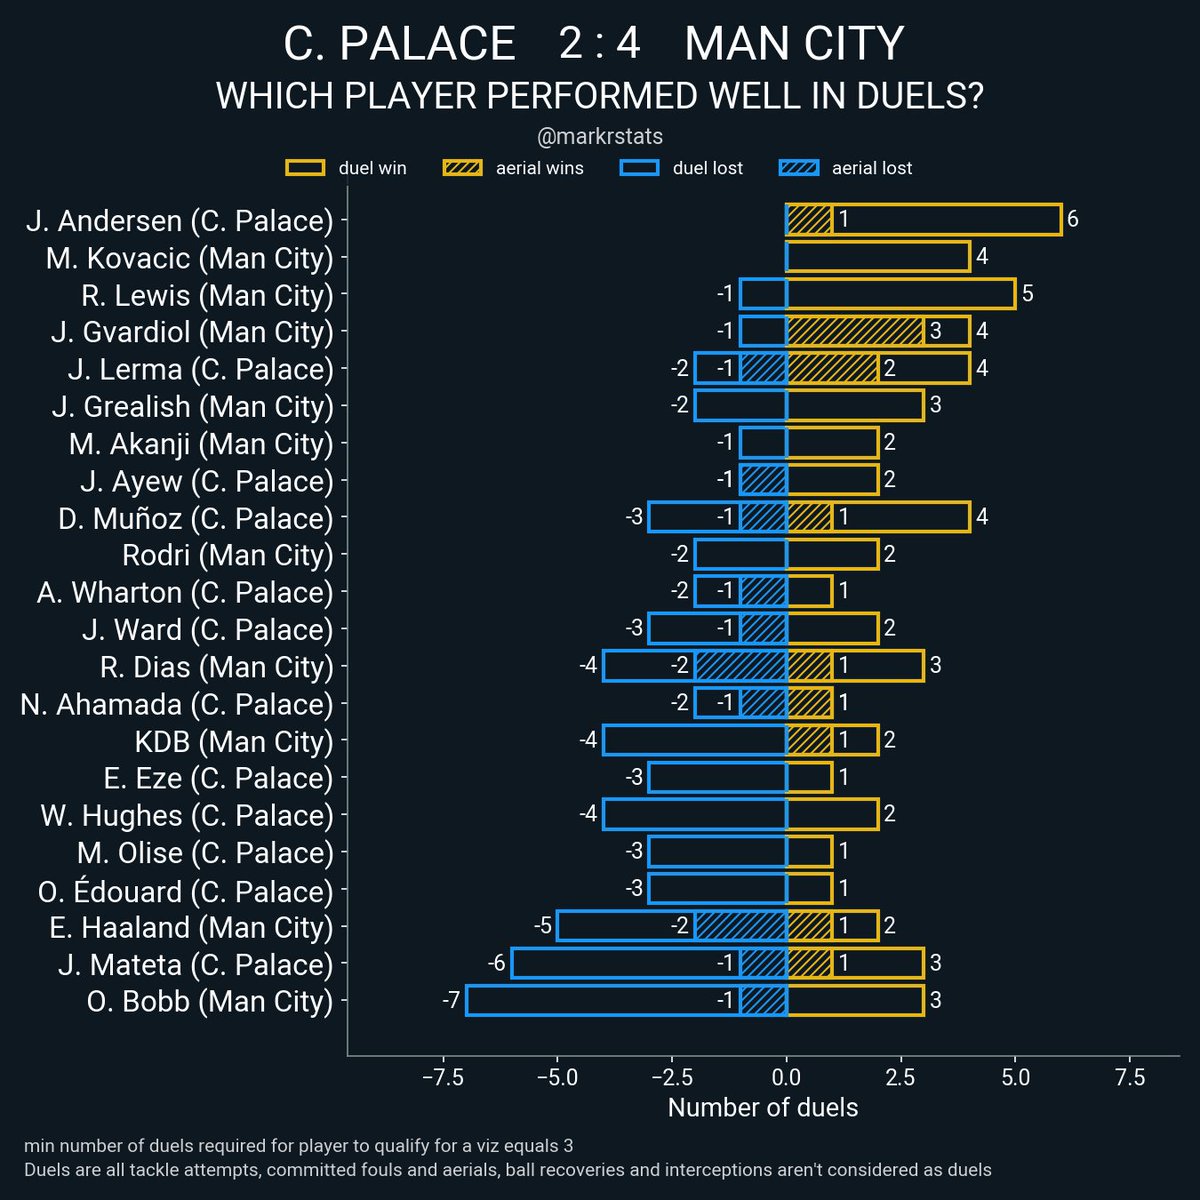 C. Palace 2 : 4 Man City ▪ Penbox shots: 4 - 12 ▪ Deep completions: 3 - 21 ▪ Buildup completion: 78.1% - 93.2% ▪ PPDA: 20.6 - 8.2 ▪ High turnovers: 3 - 3